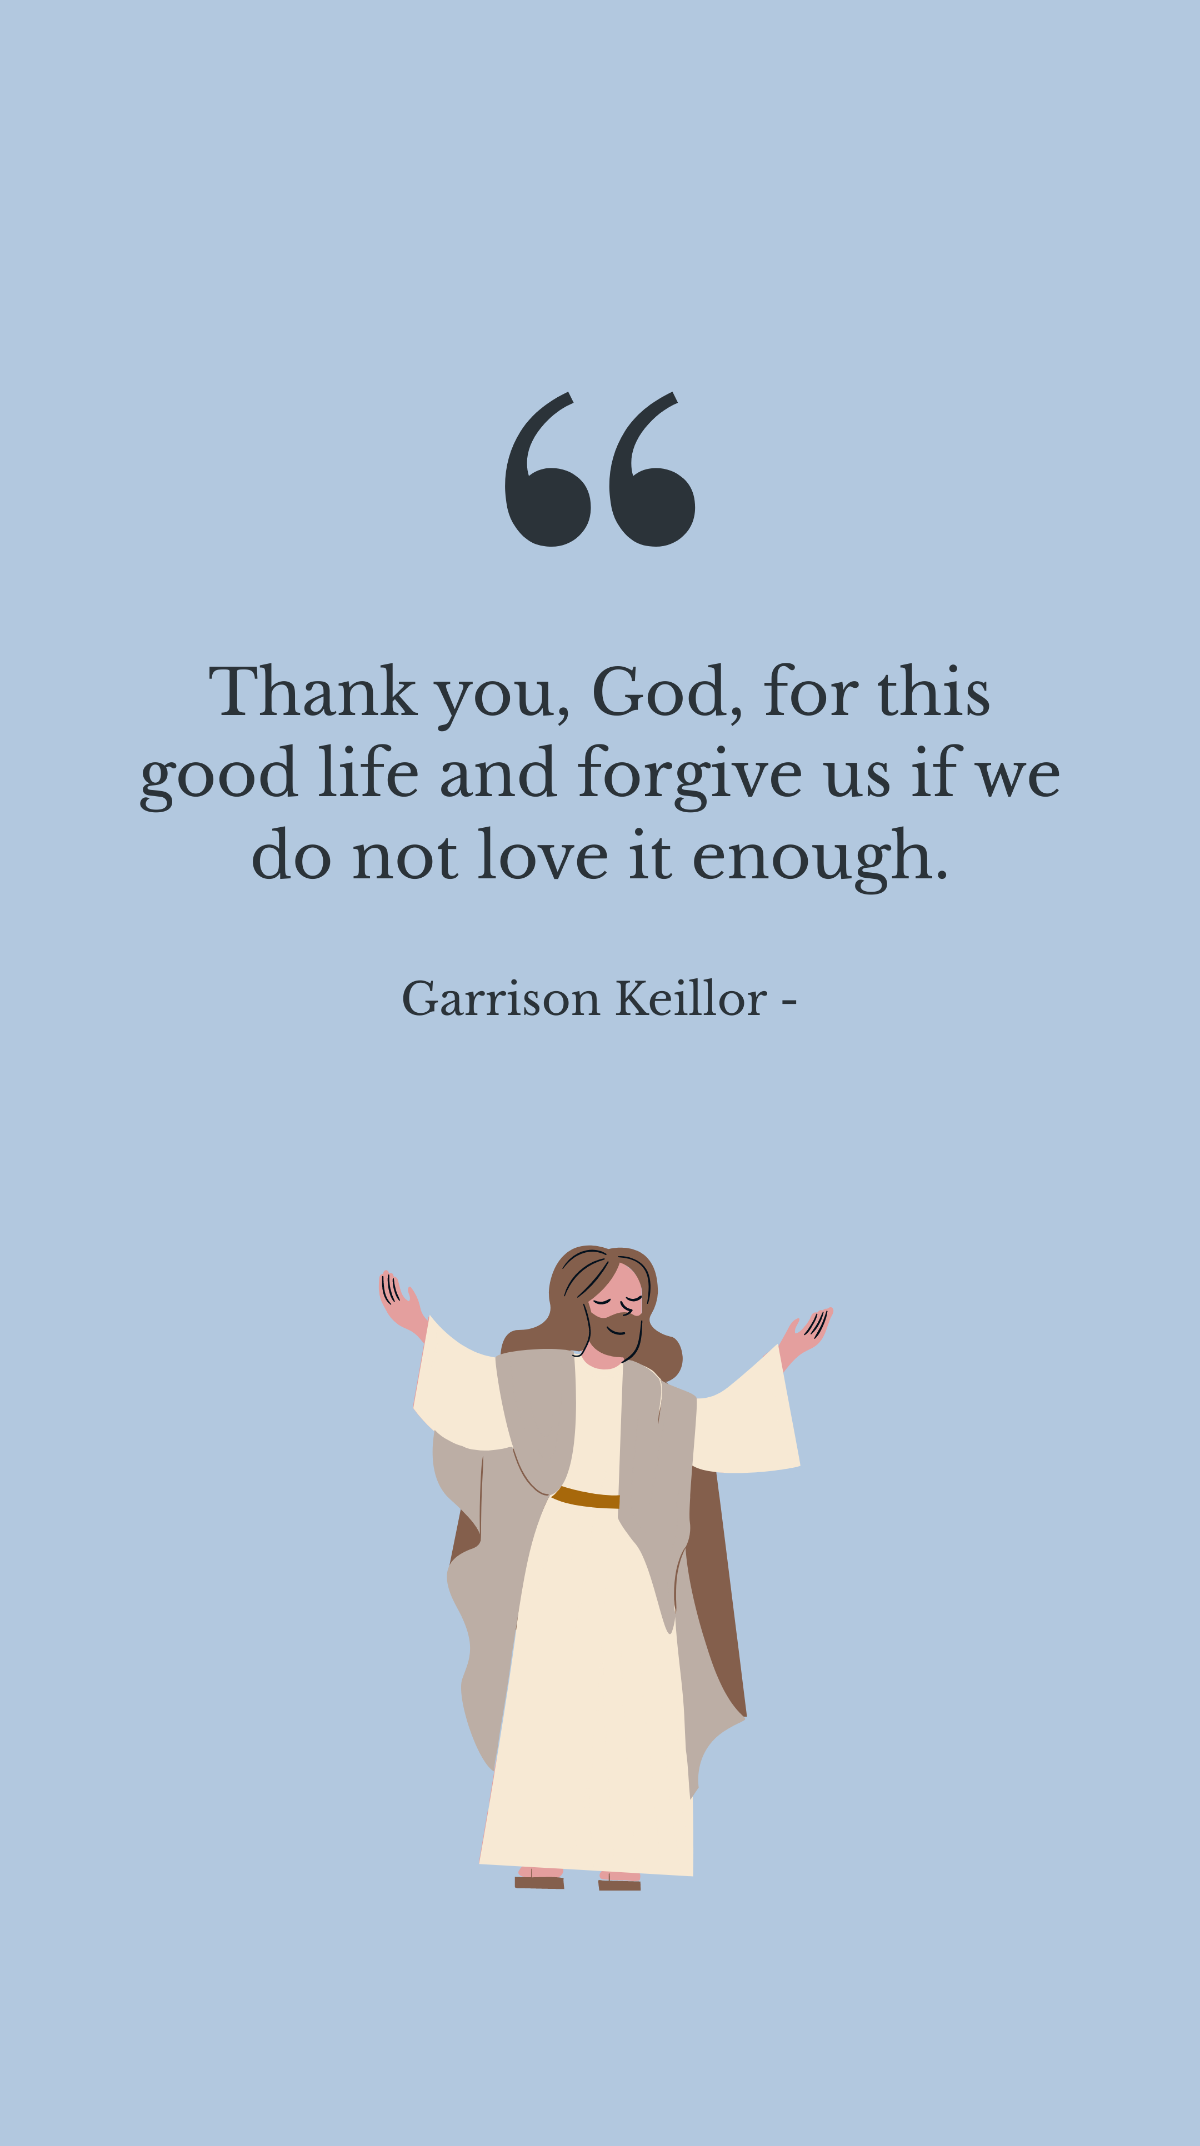 Garrison Keillor - Thank you, God, for this good life and forgive us if we do not love it enough.